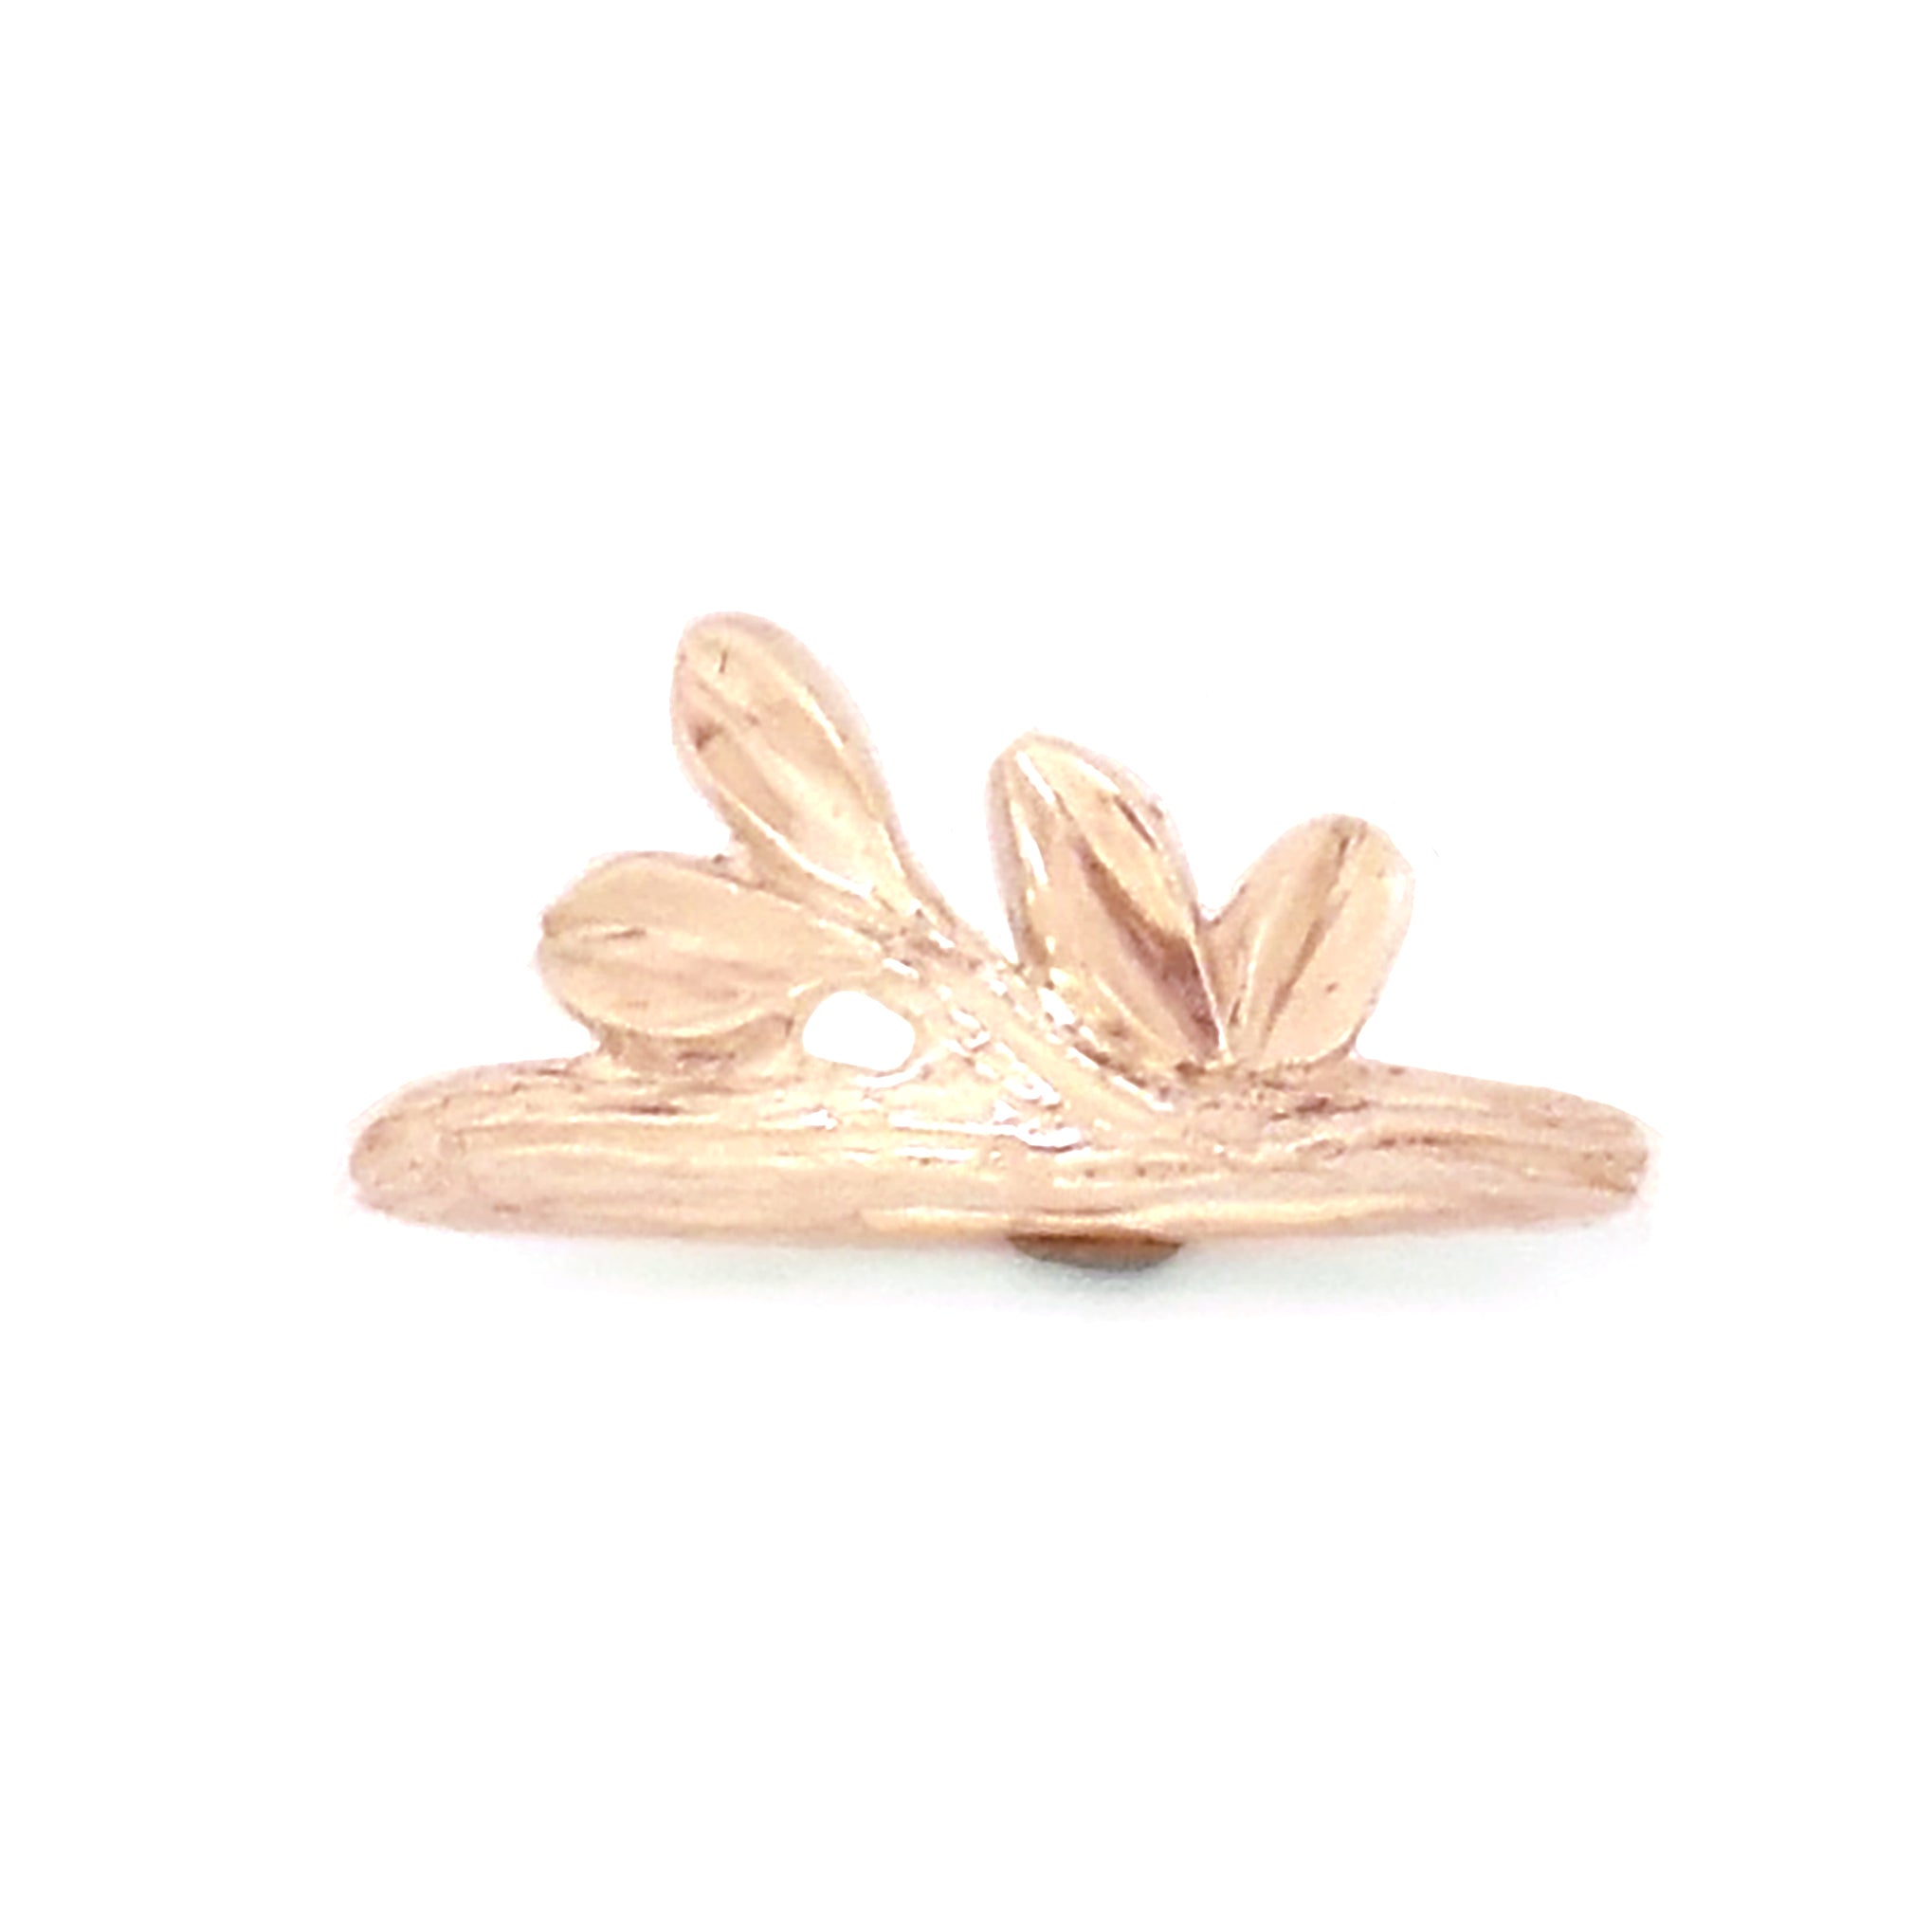 Gold Growing Love Twig Ring - your choice of gold - Wedding Ring 14K Rose Gold 18K Palladium White Gold 6354 - handmade by Beth Millner Jewelry